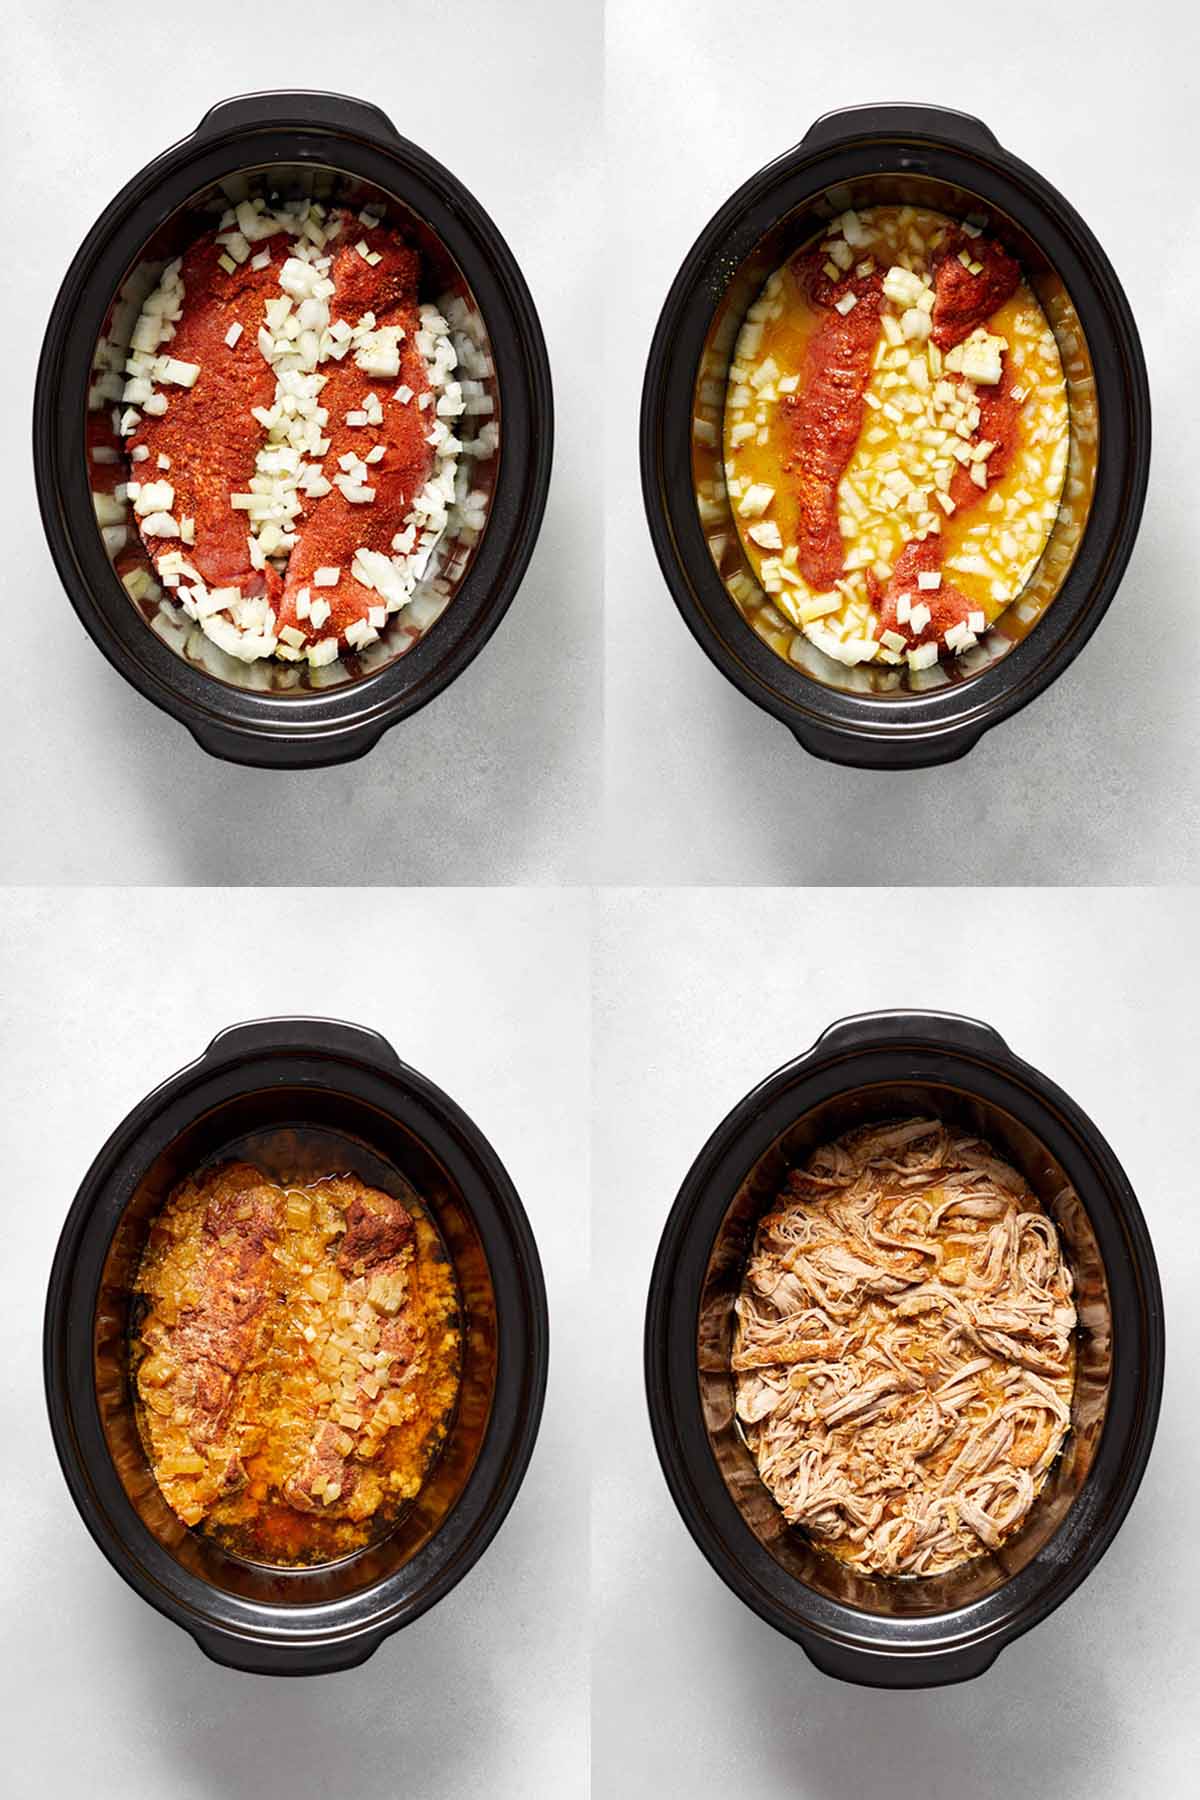 Collage of 4 images showing the steps to cooking the pork tenderloins in a crockpot.